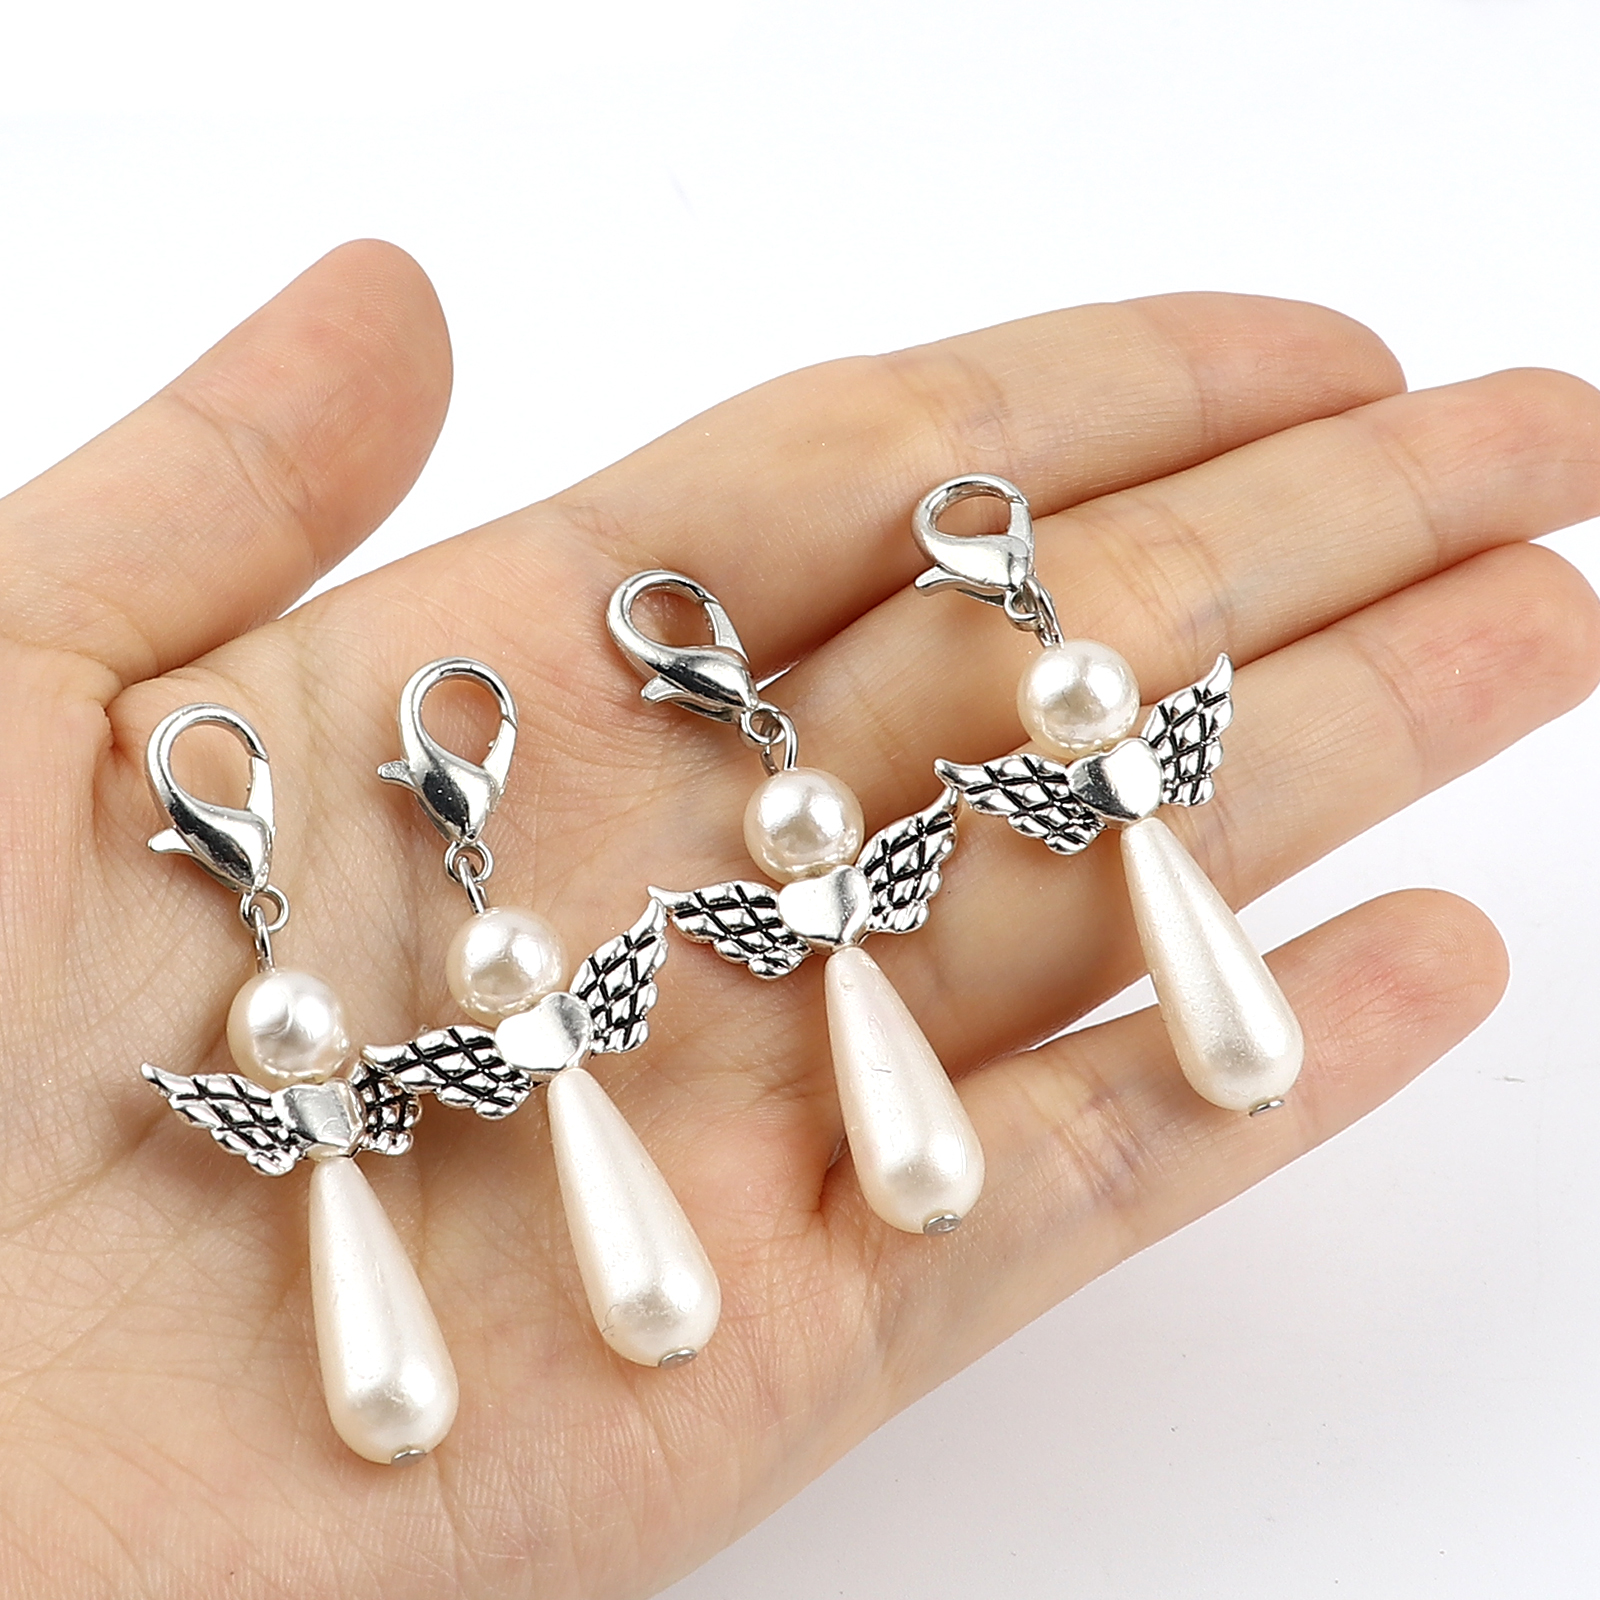 Picture of Zinc Based Alloy Knitting Stitch Markers Angel Antique Silver Color Creamy-White 38mm x 22mm, 5 PCs